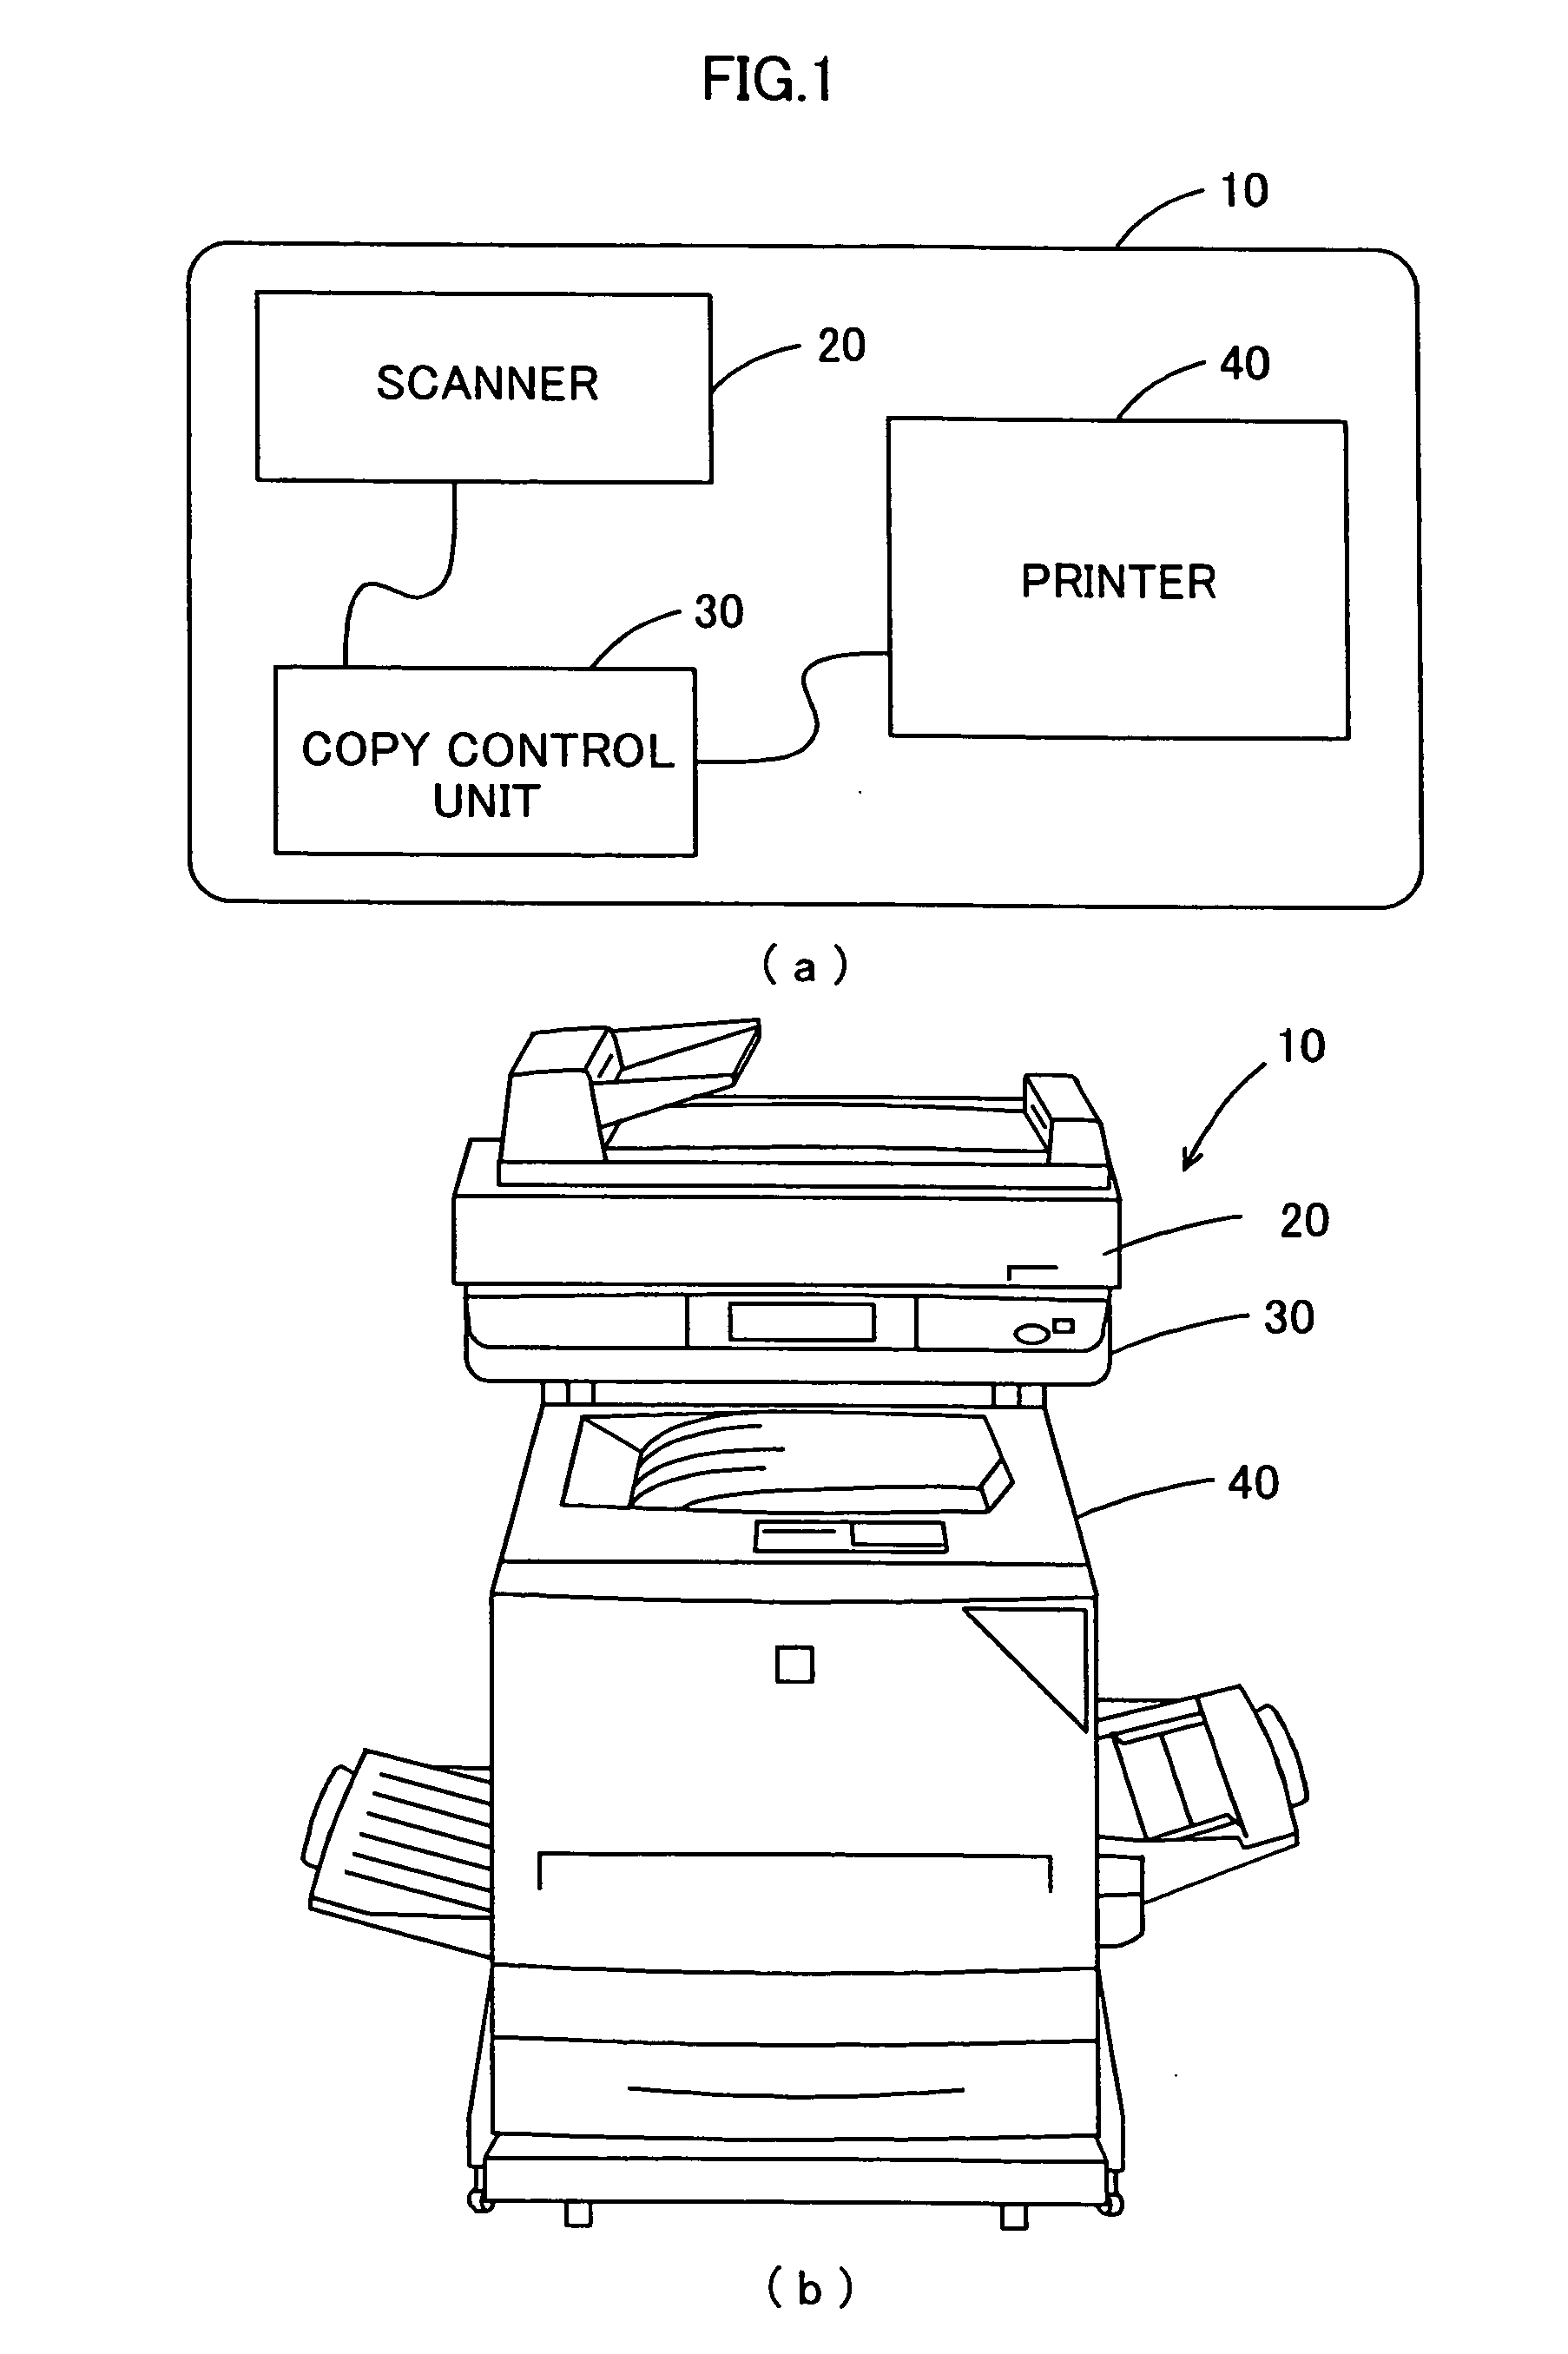 Control of image scanning device